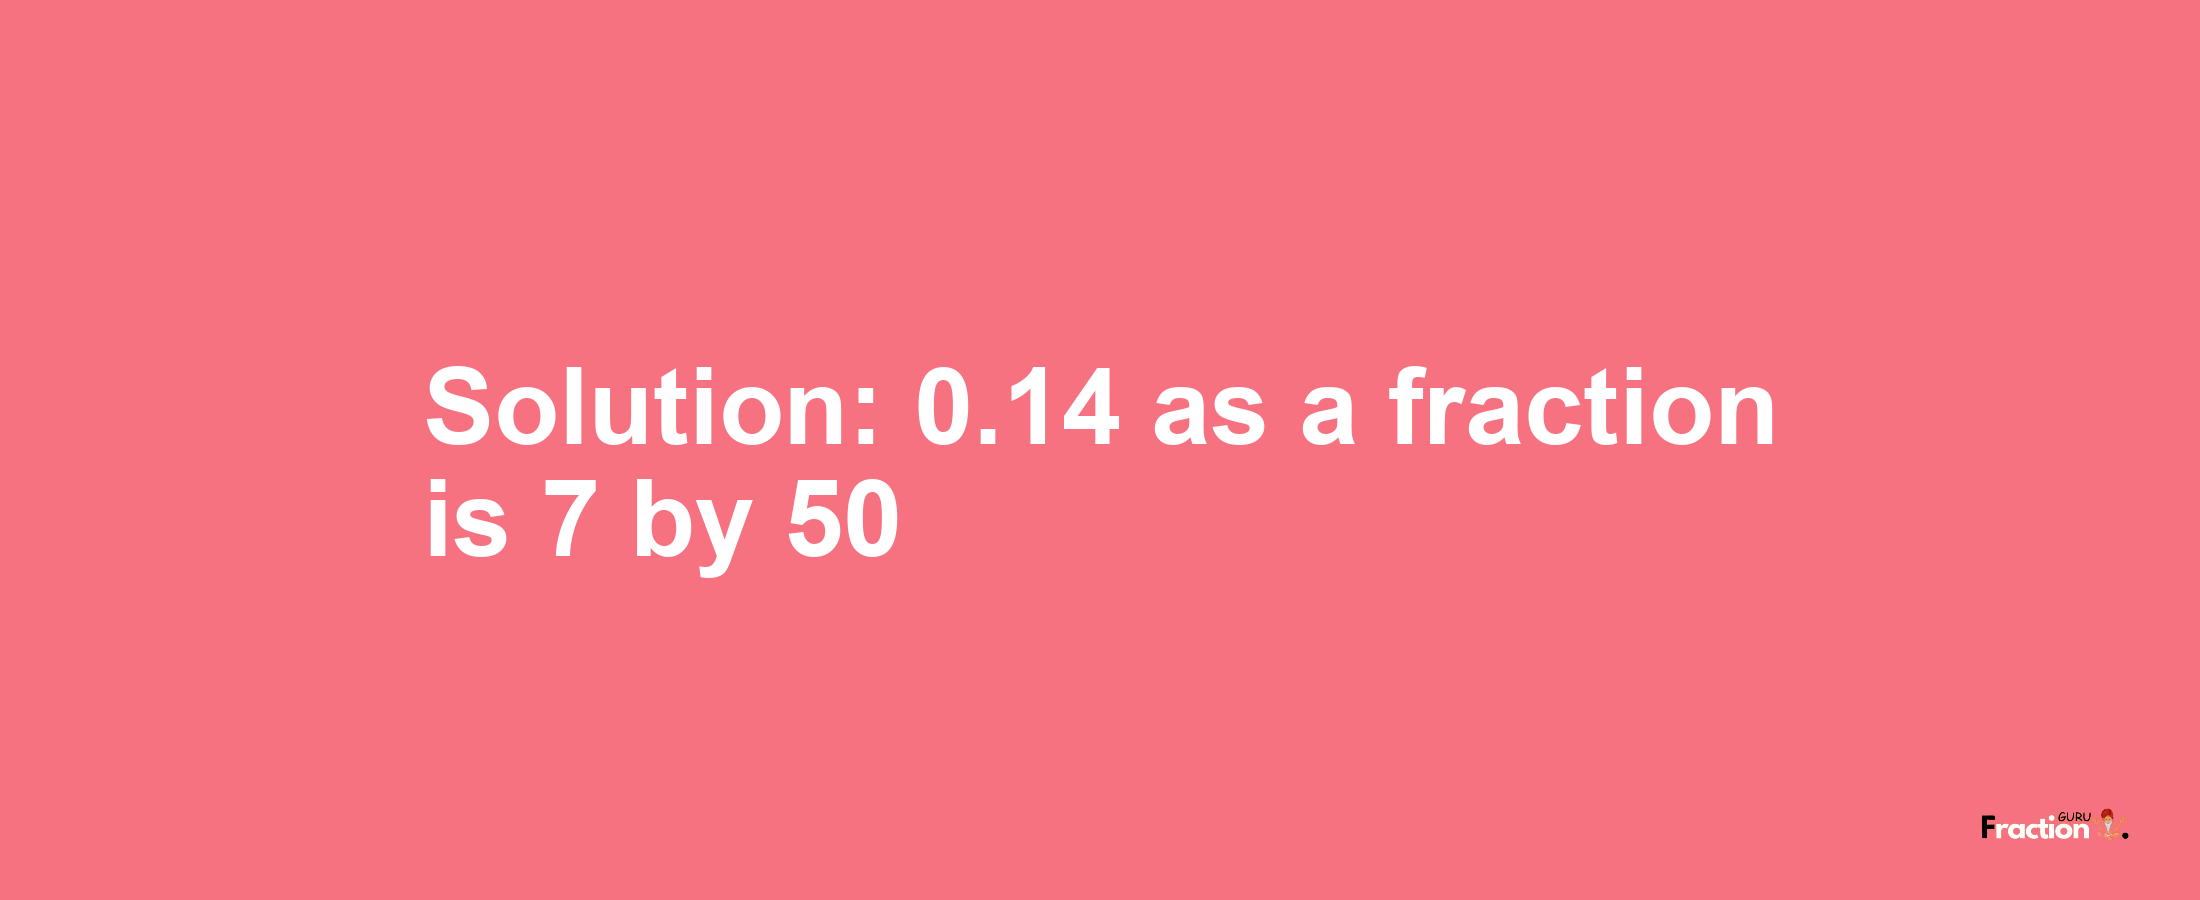 Solution:0.14 as a fraction is 7/50